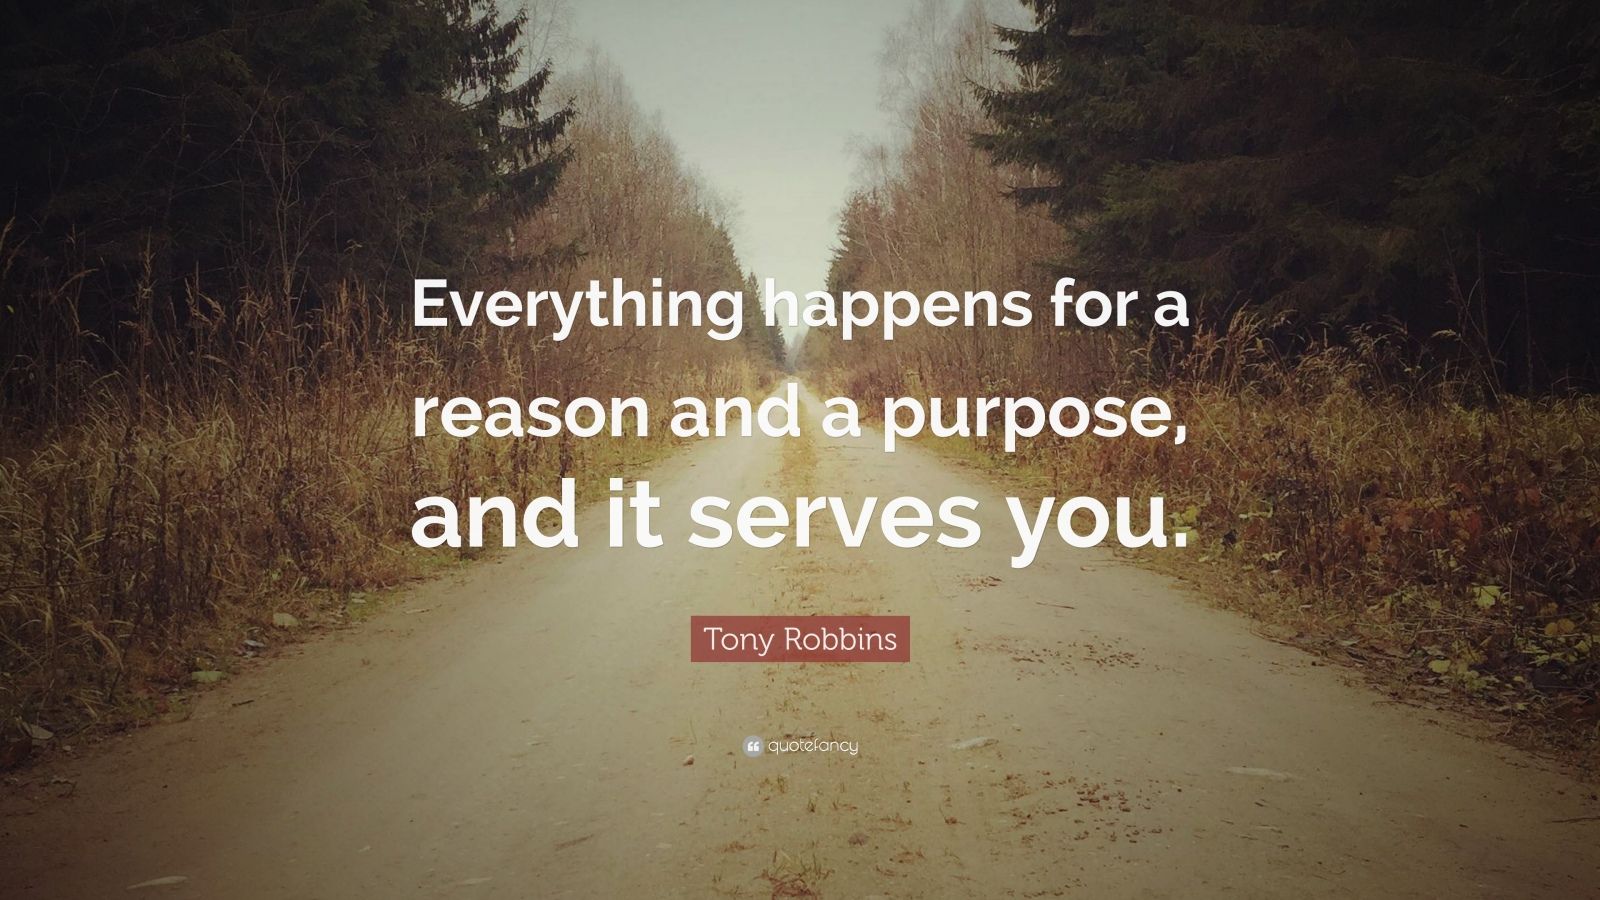 Tony Robbins Quote: "Everything happens for a reason and a purpose, and it serves you." (9 ...